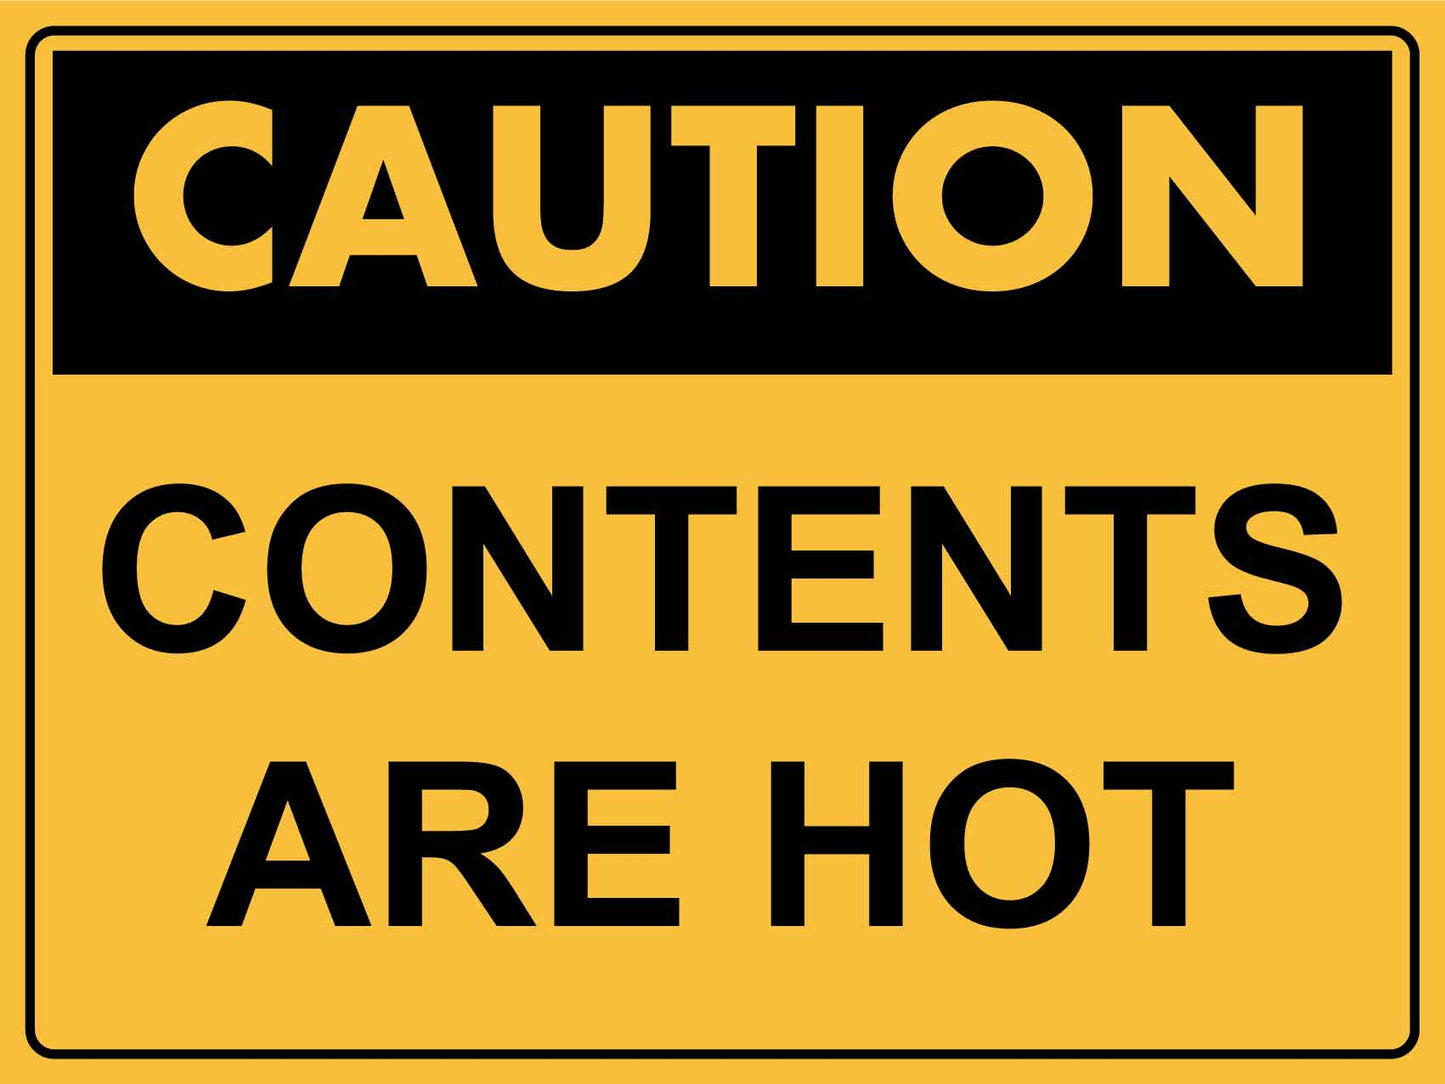 Caution Contents are Hot Sign